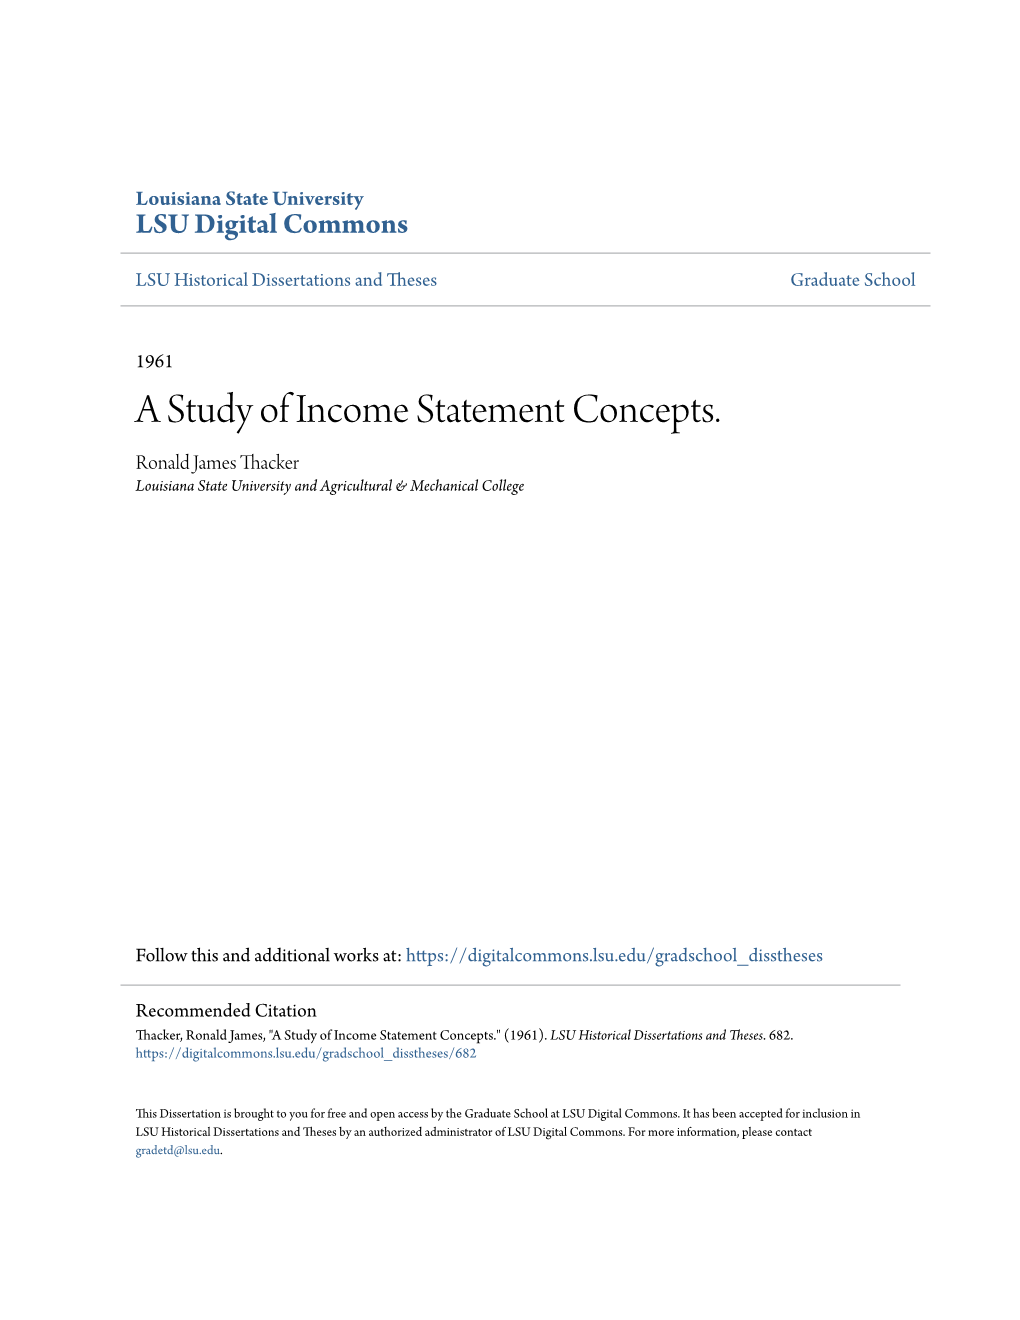 A Study of Income Statement Concepts. Ronald James Thacker Louisiana State University and Agricultural & Mechanical College